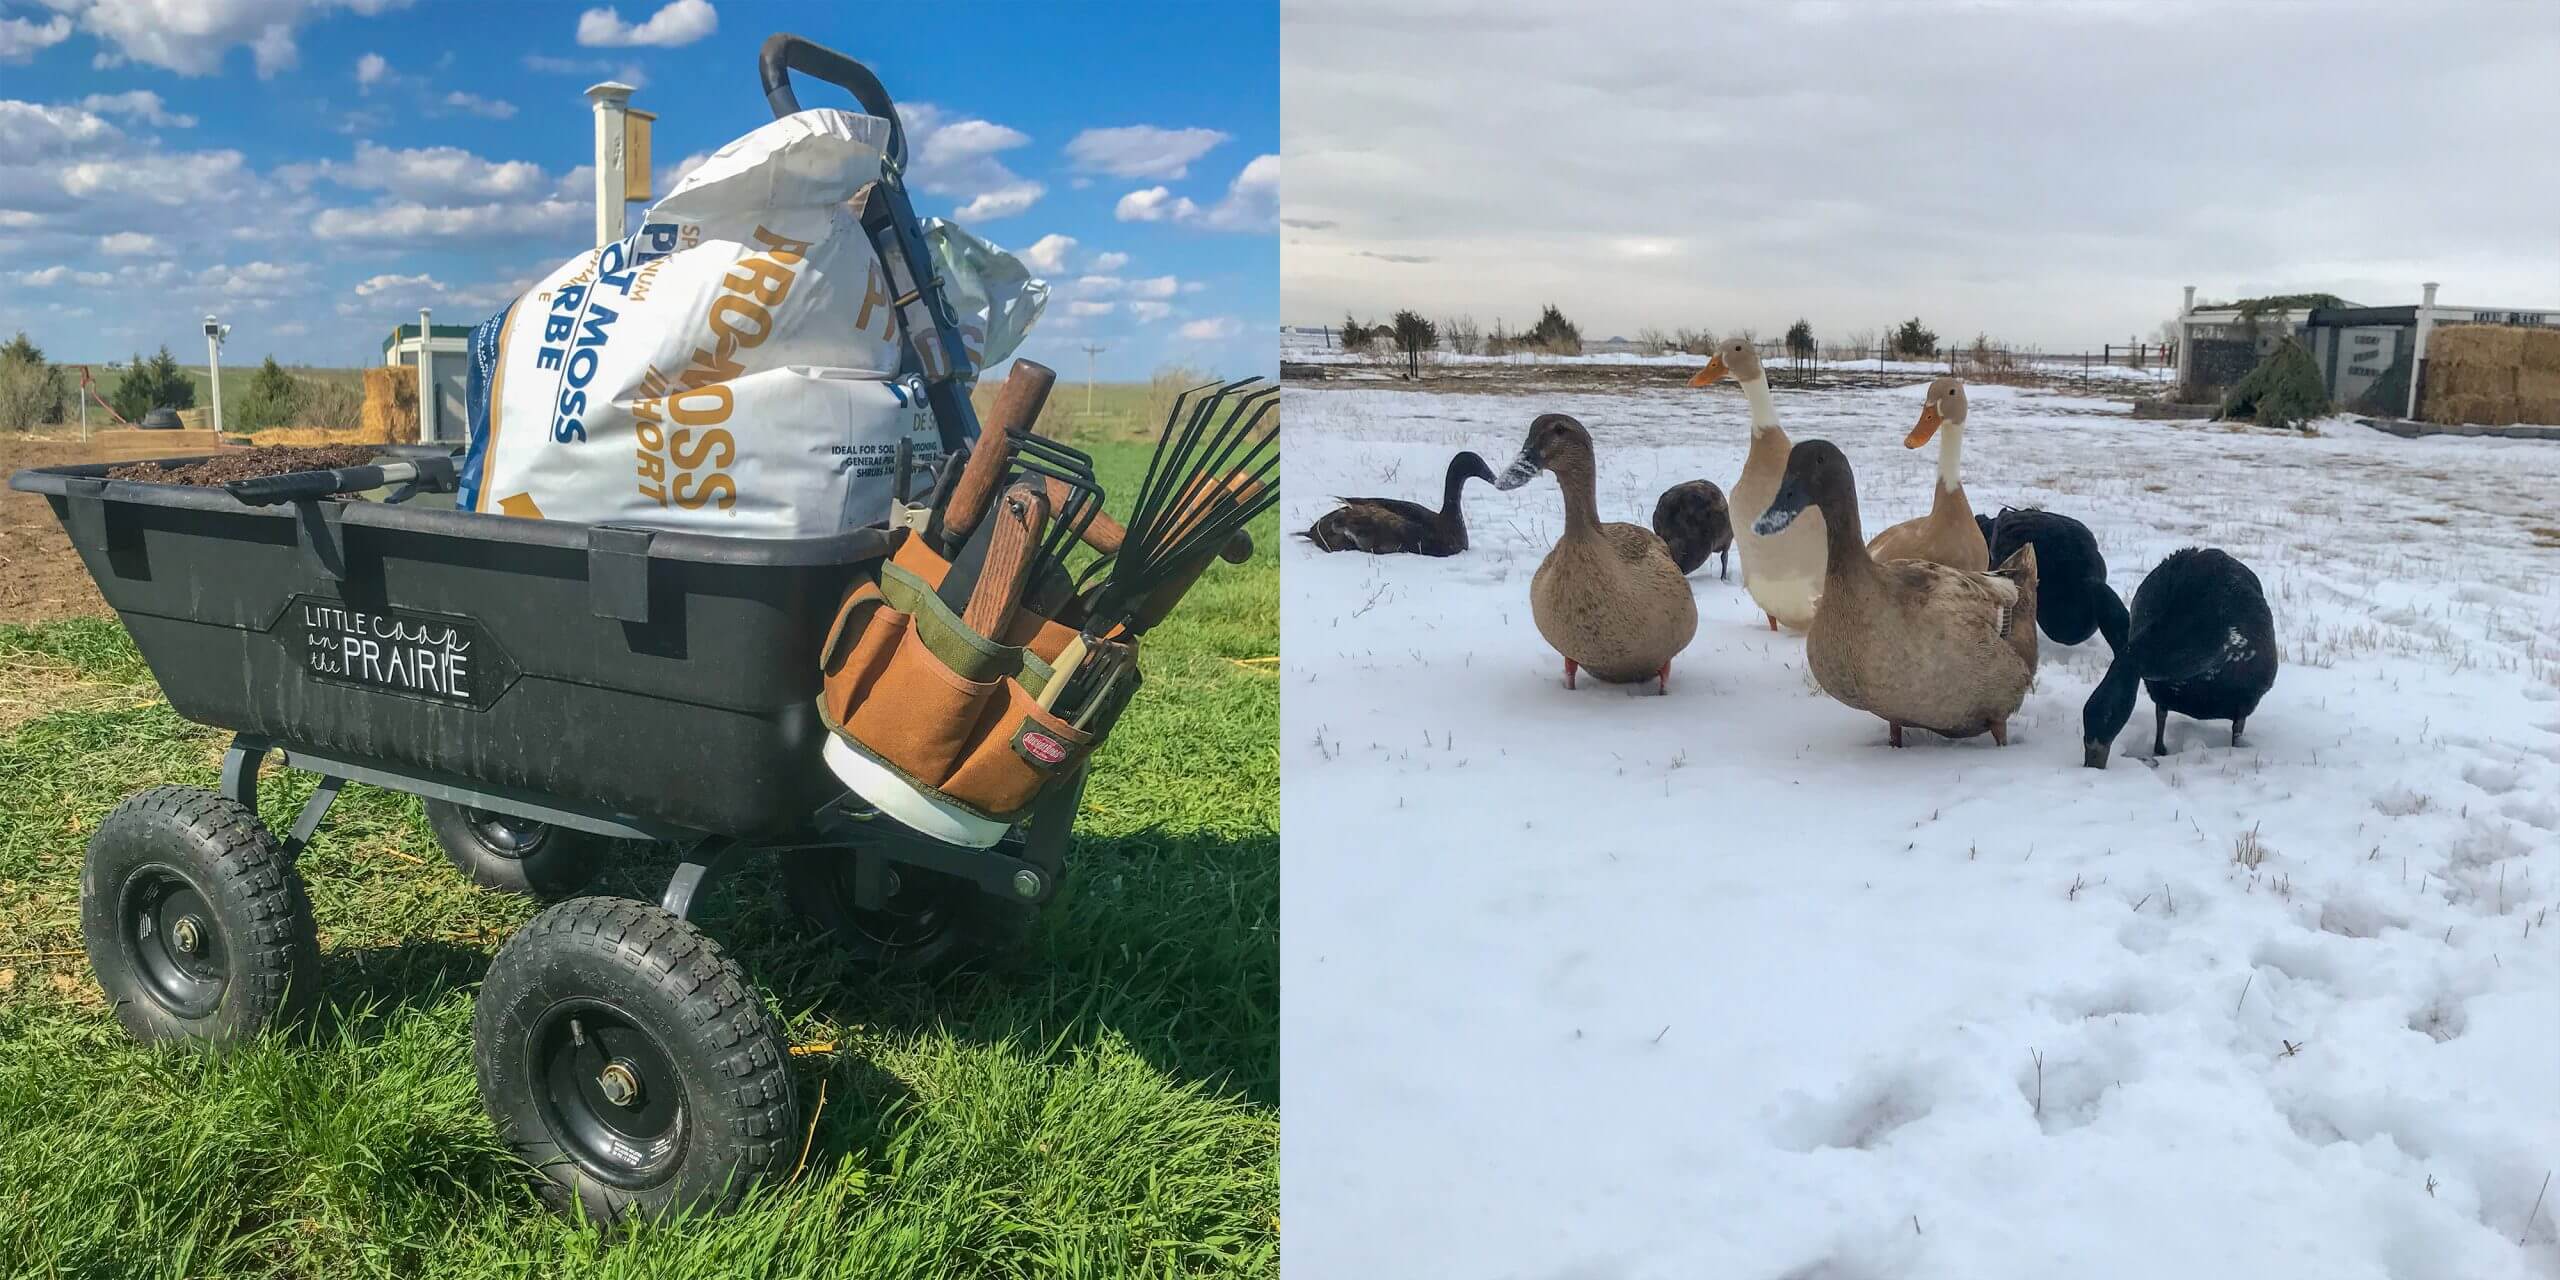 Gorilla cart in a yard and ducks in the snow